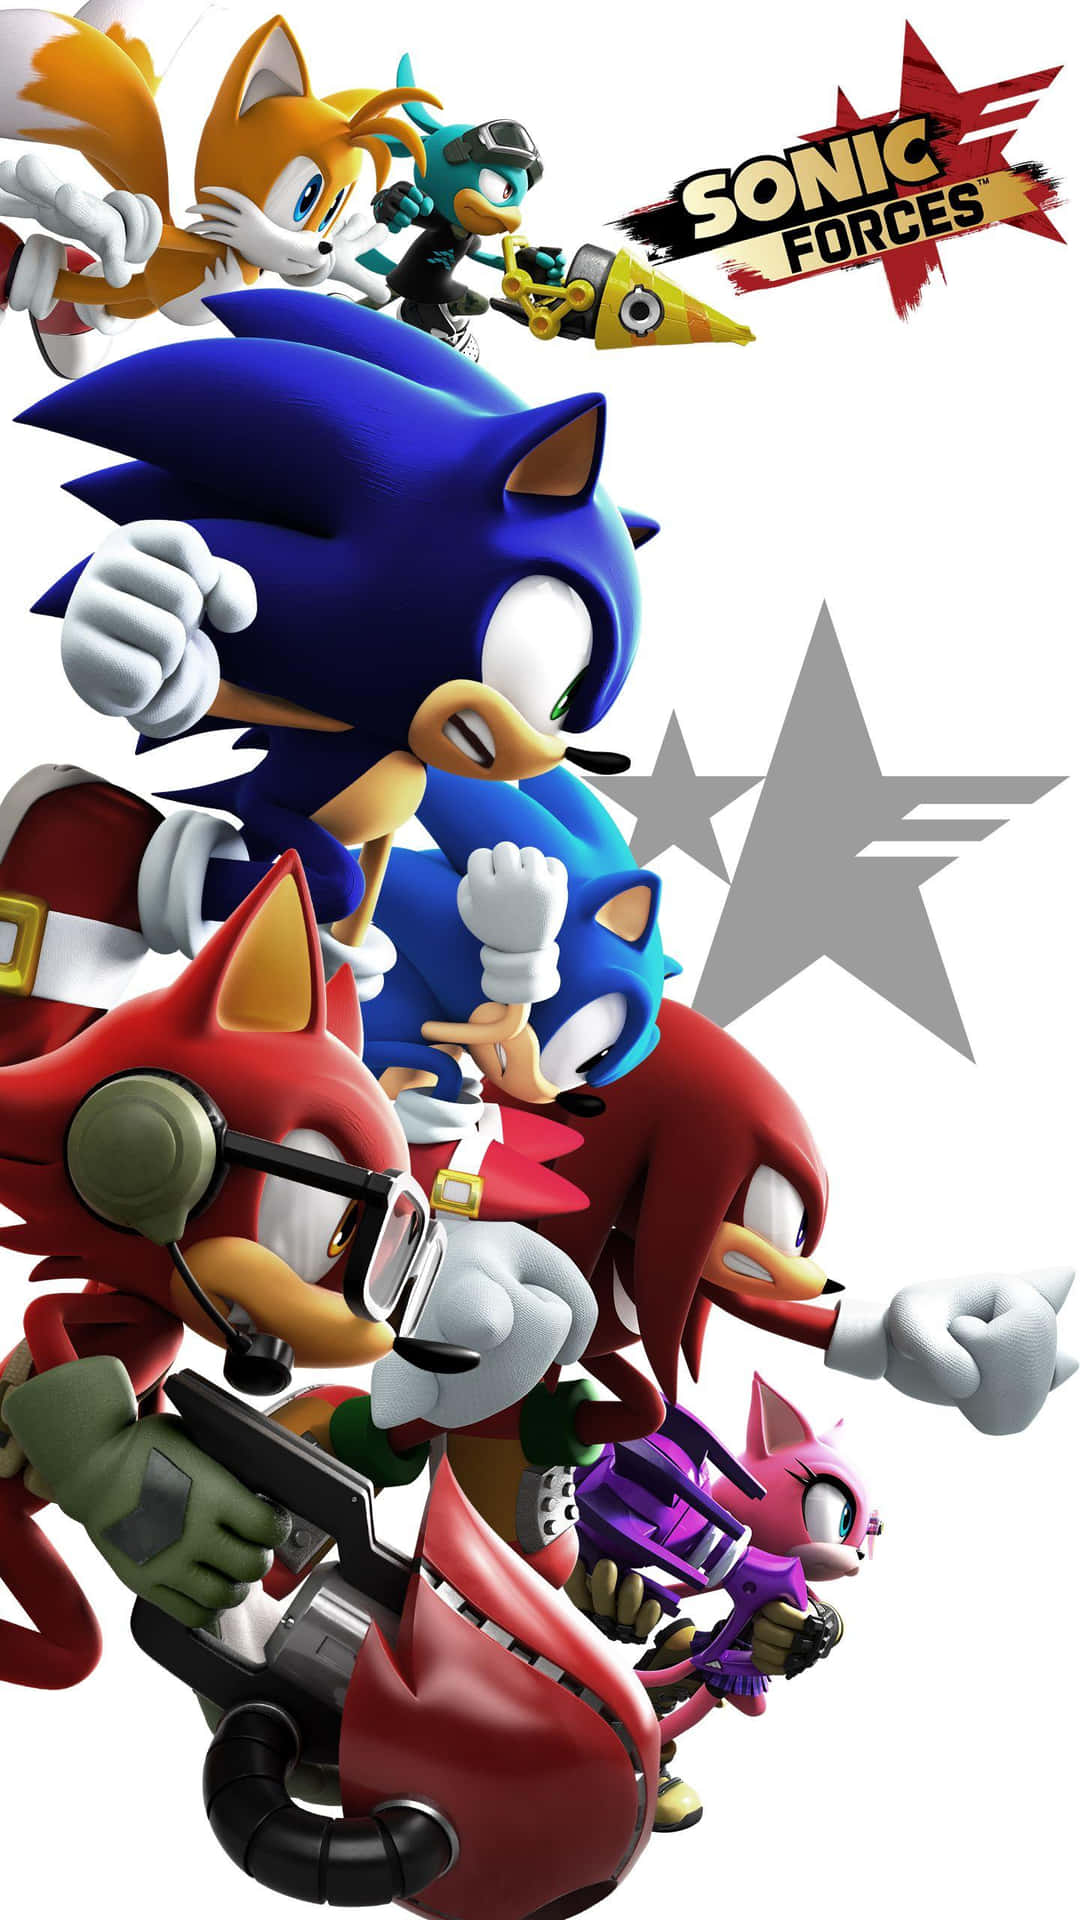 Sonic Forces Speed Battle in Action Wallpaper